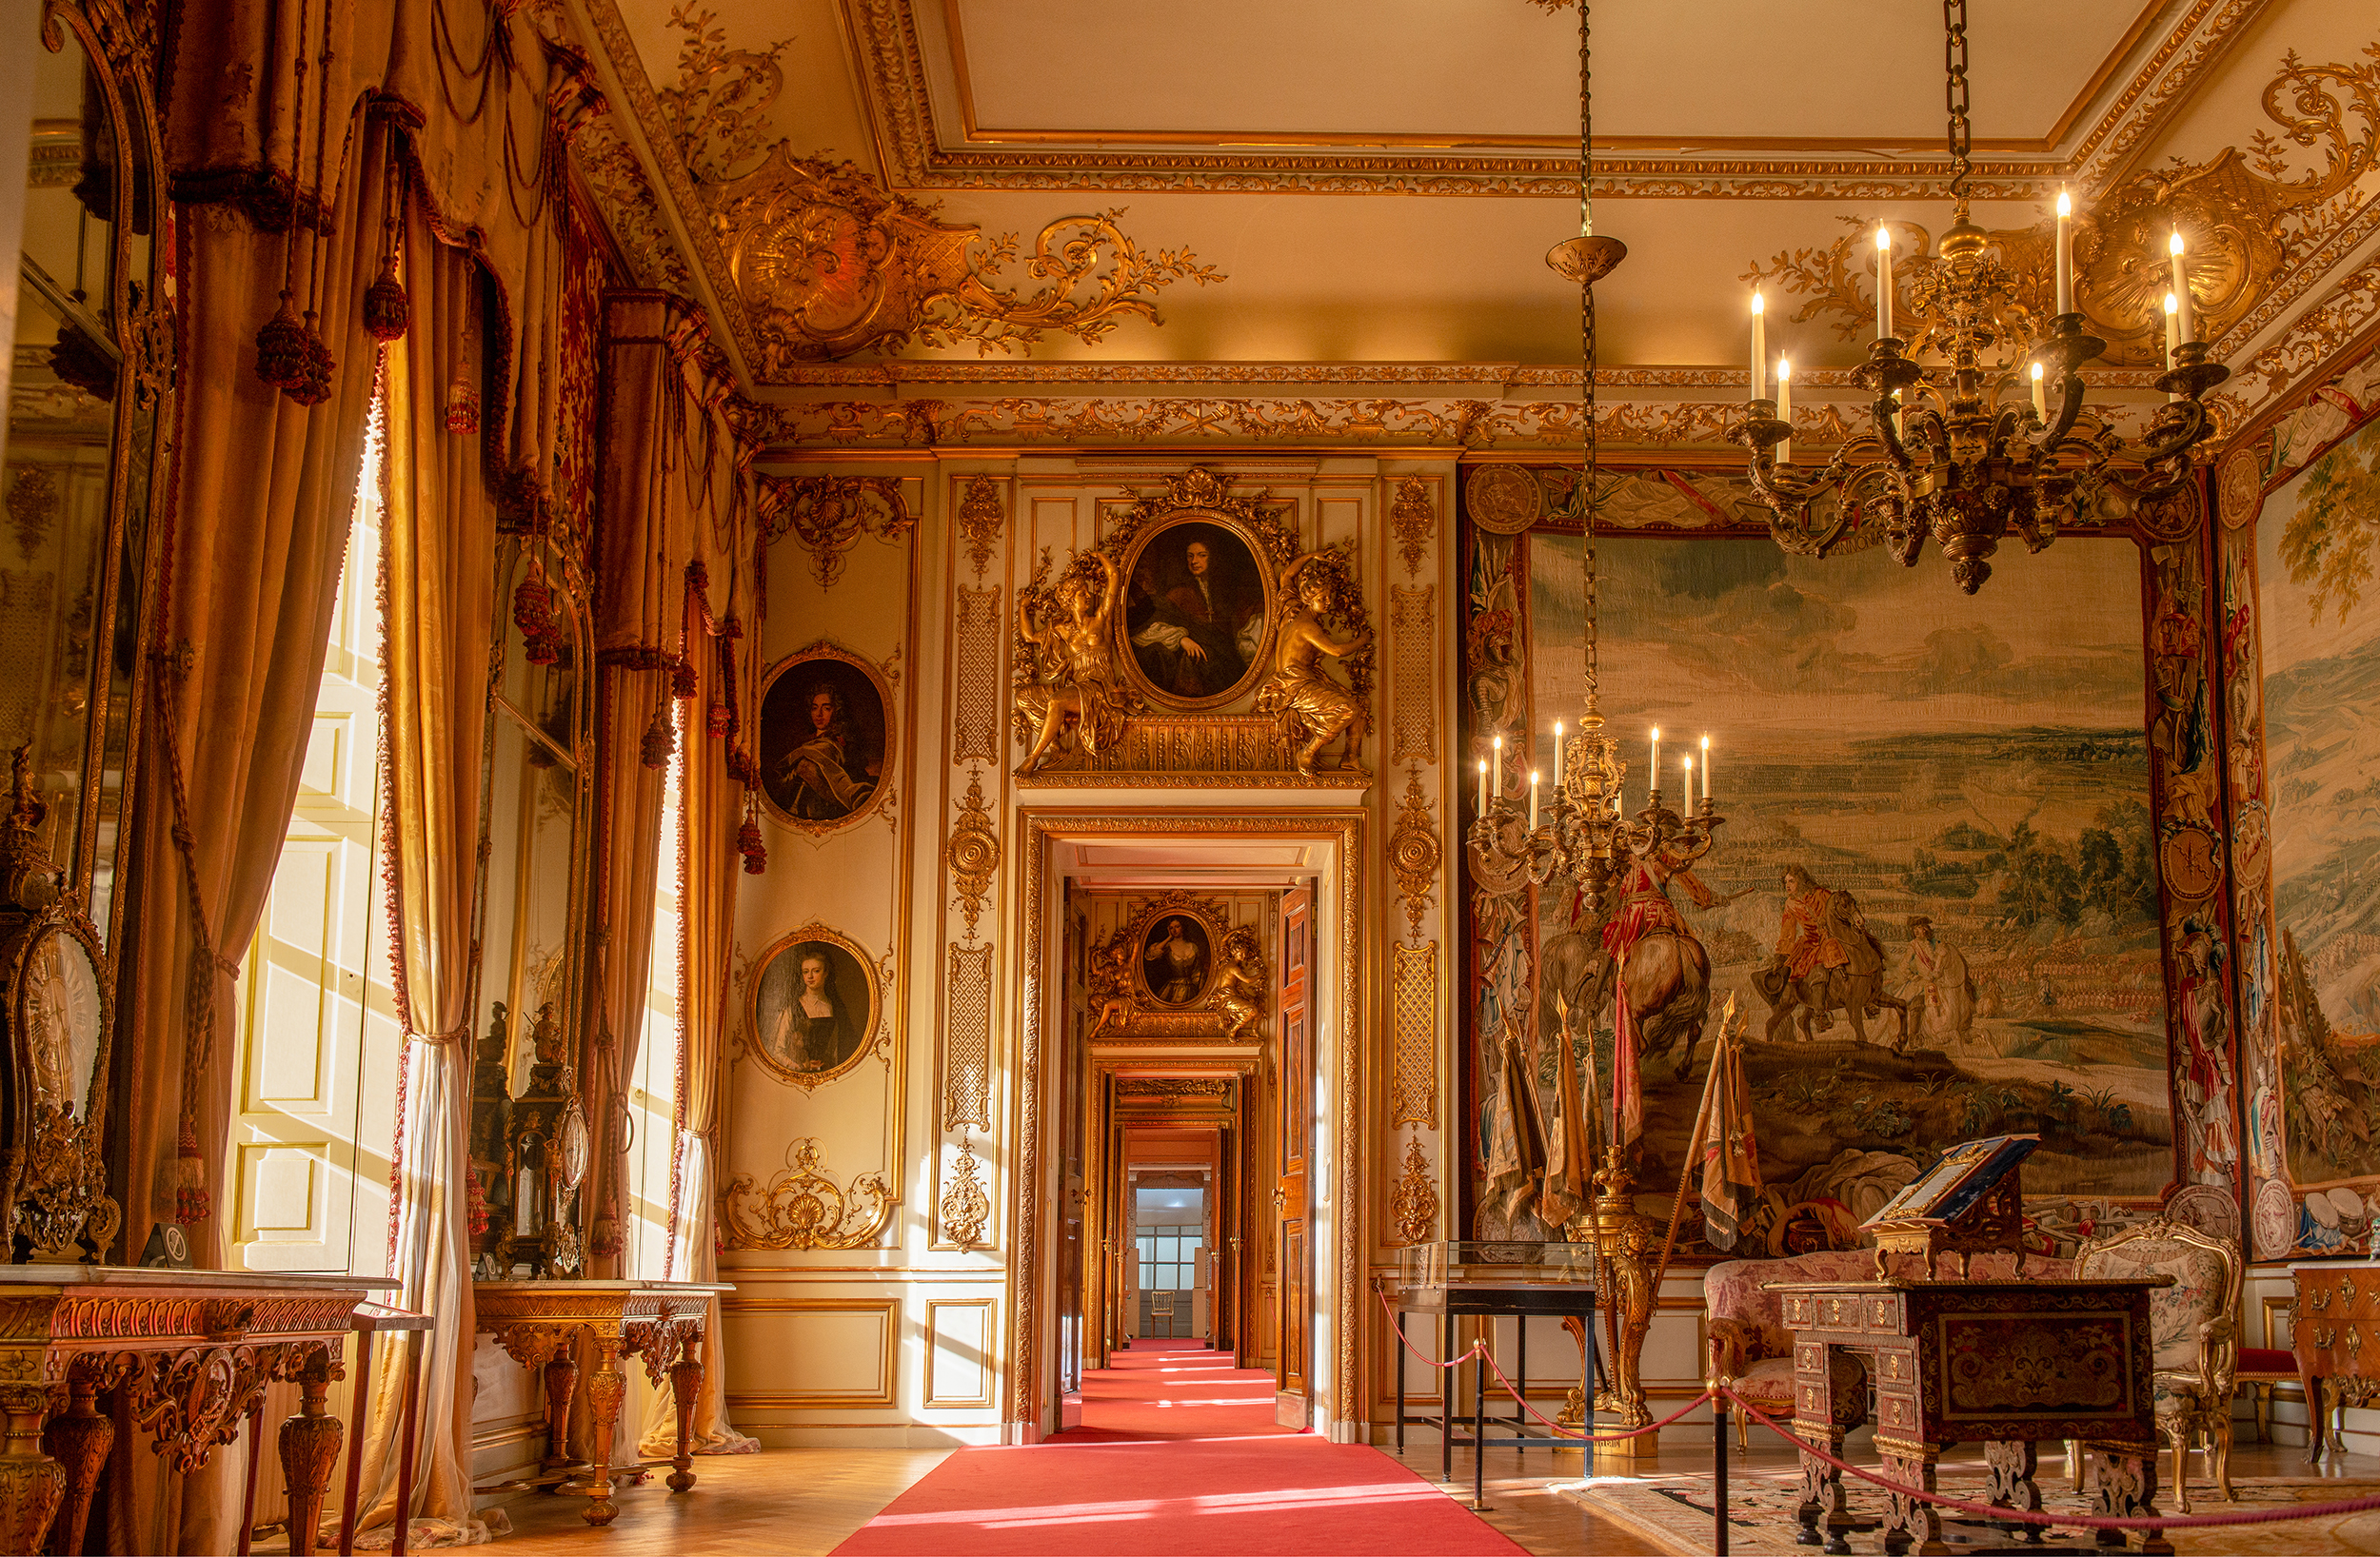 The Palace State Rooms Blenheim Palace